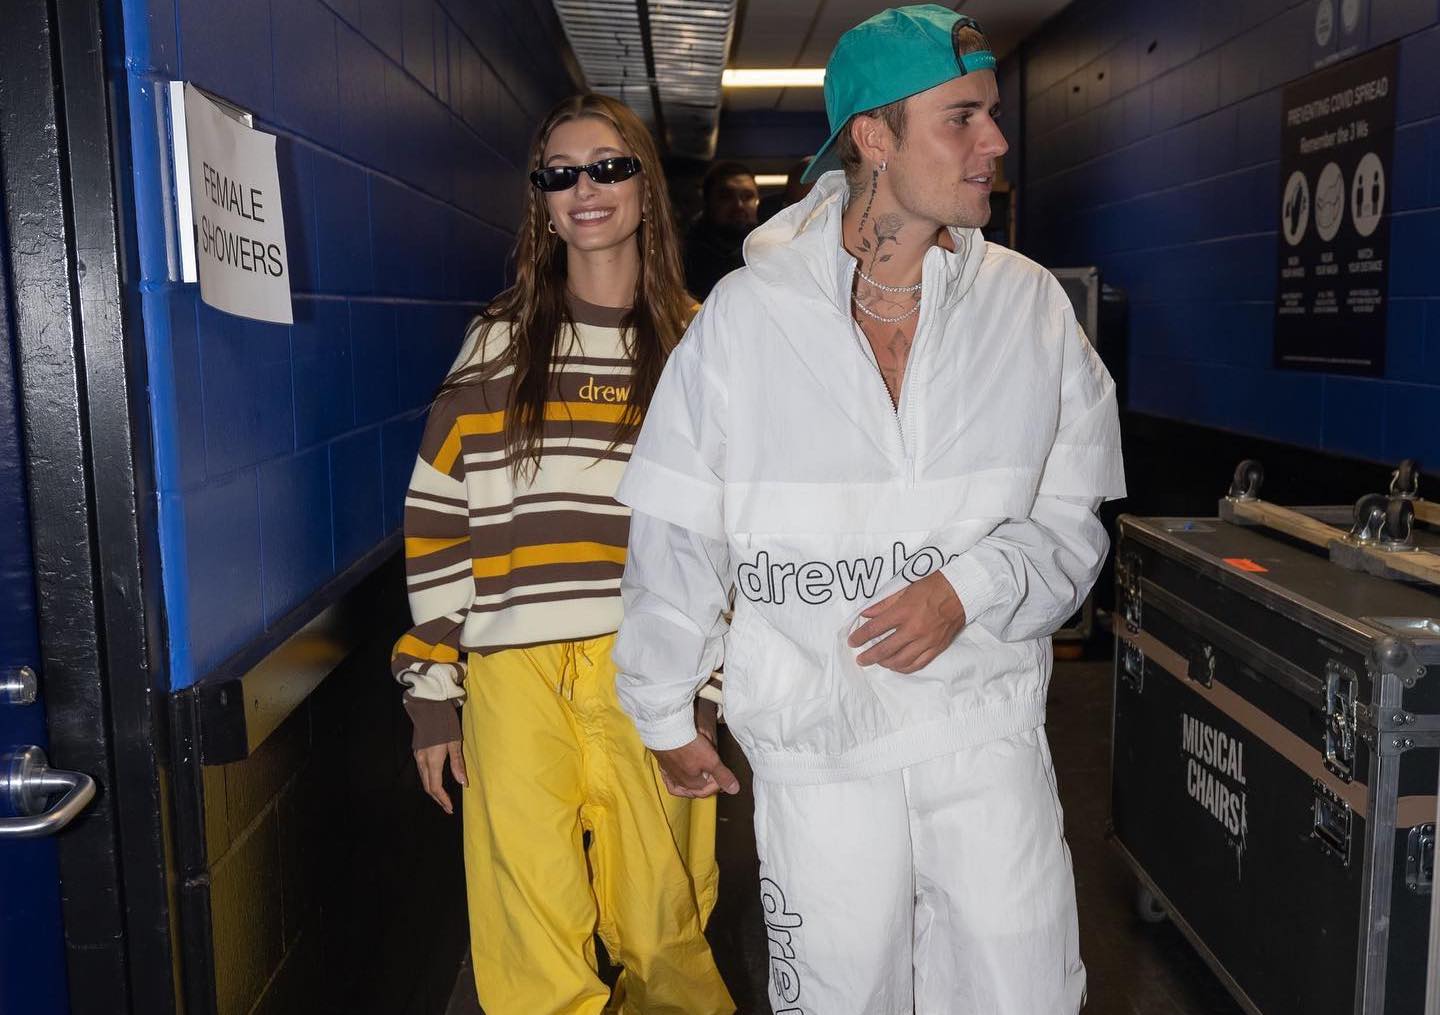 SPOTTED: Justin & Hailey Bieber backstage in Drew House